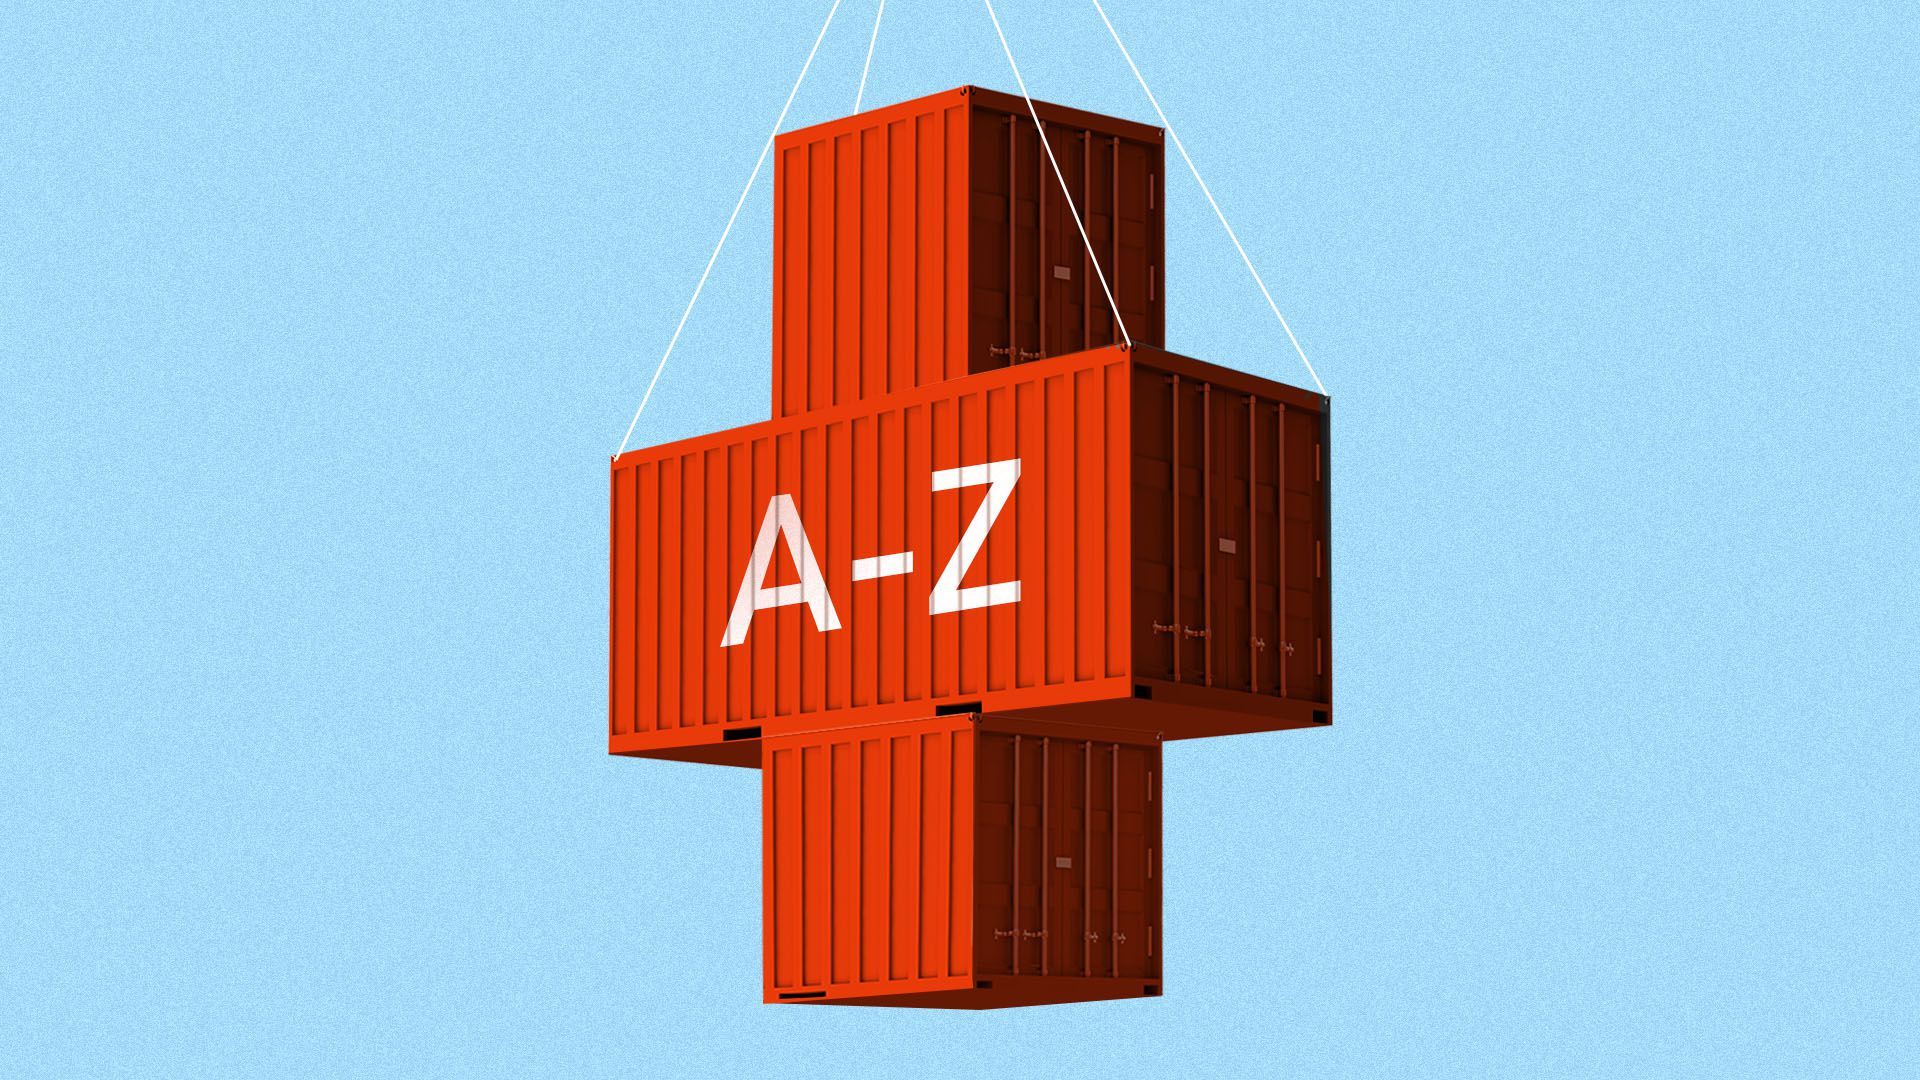 Illustration of a shipping container in the shape of a red cross with 